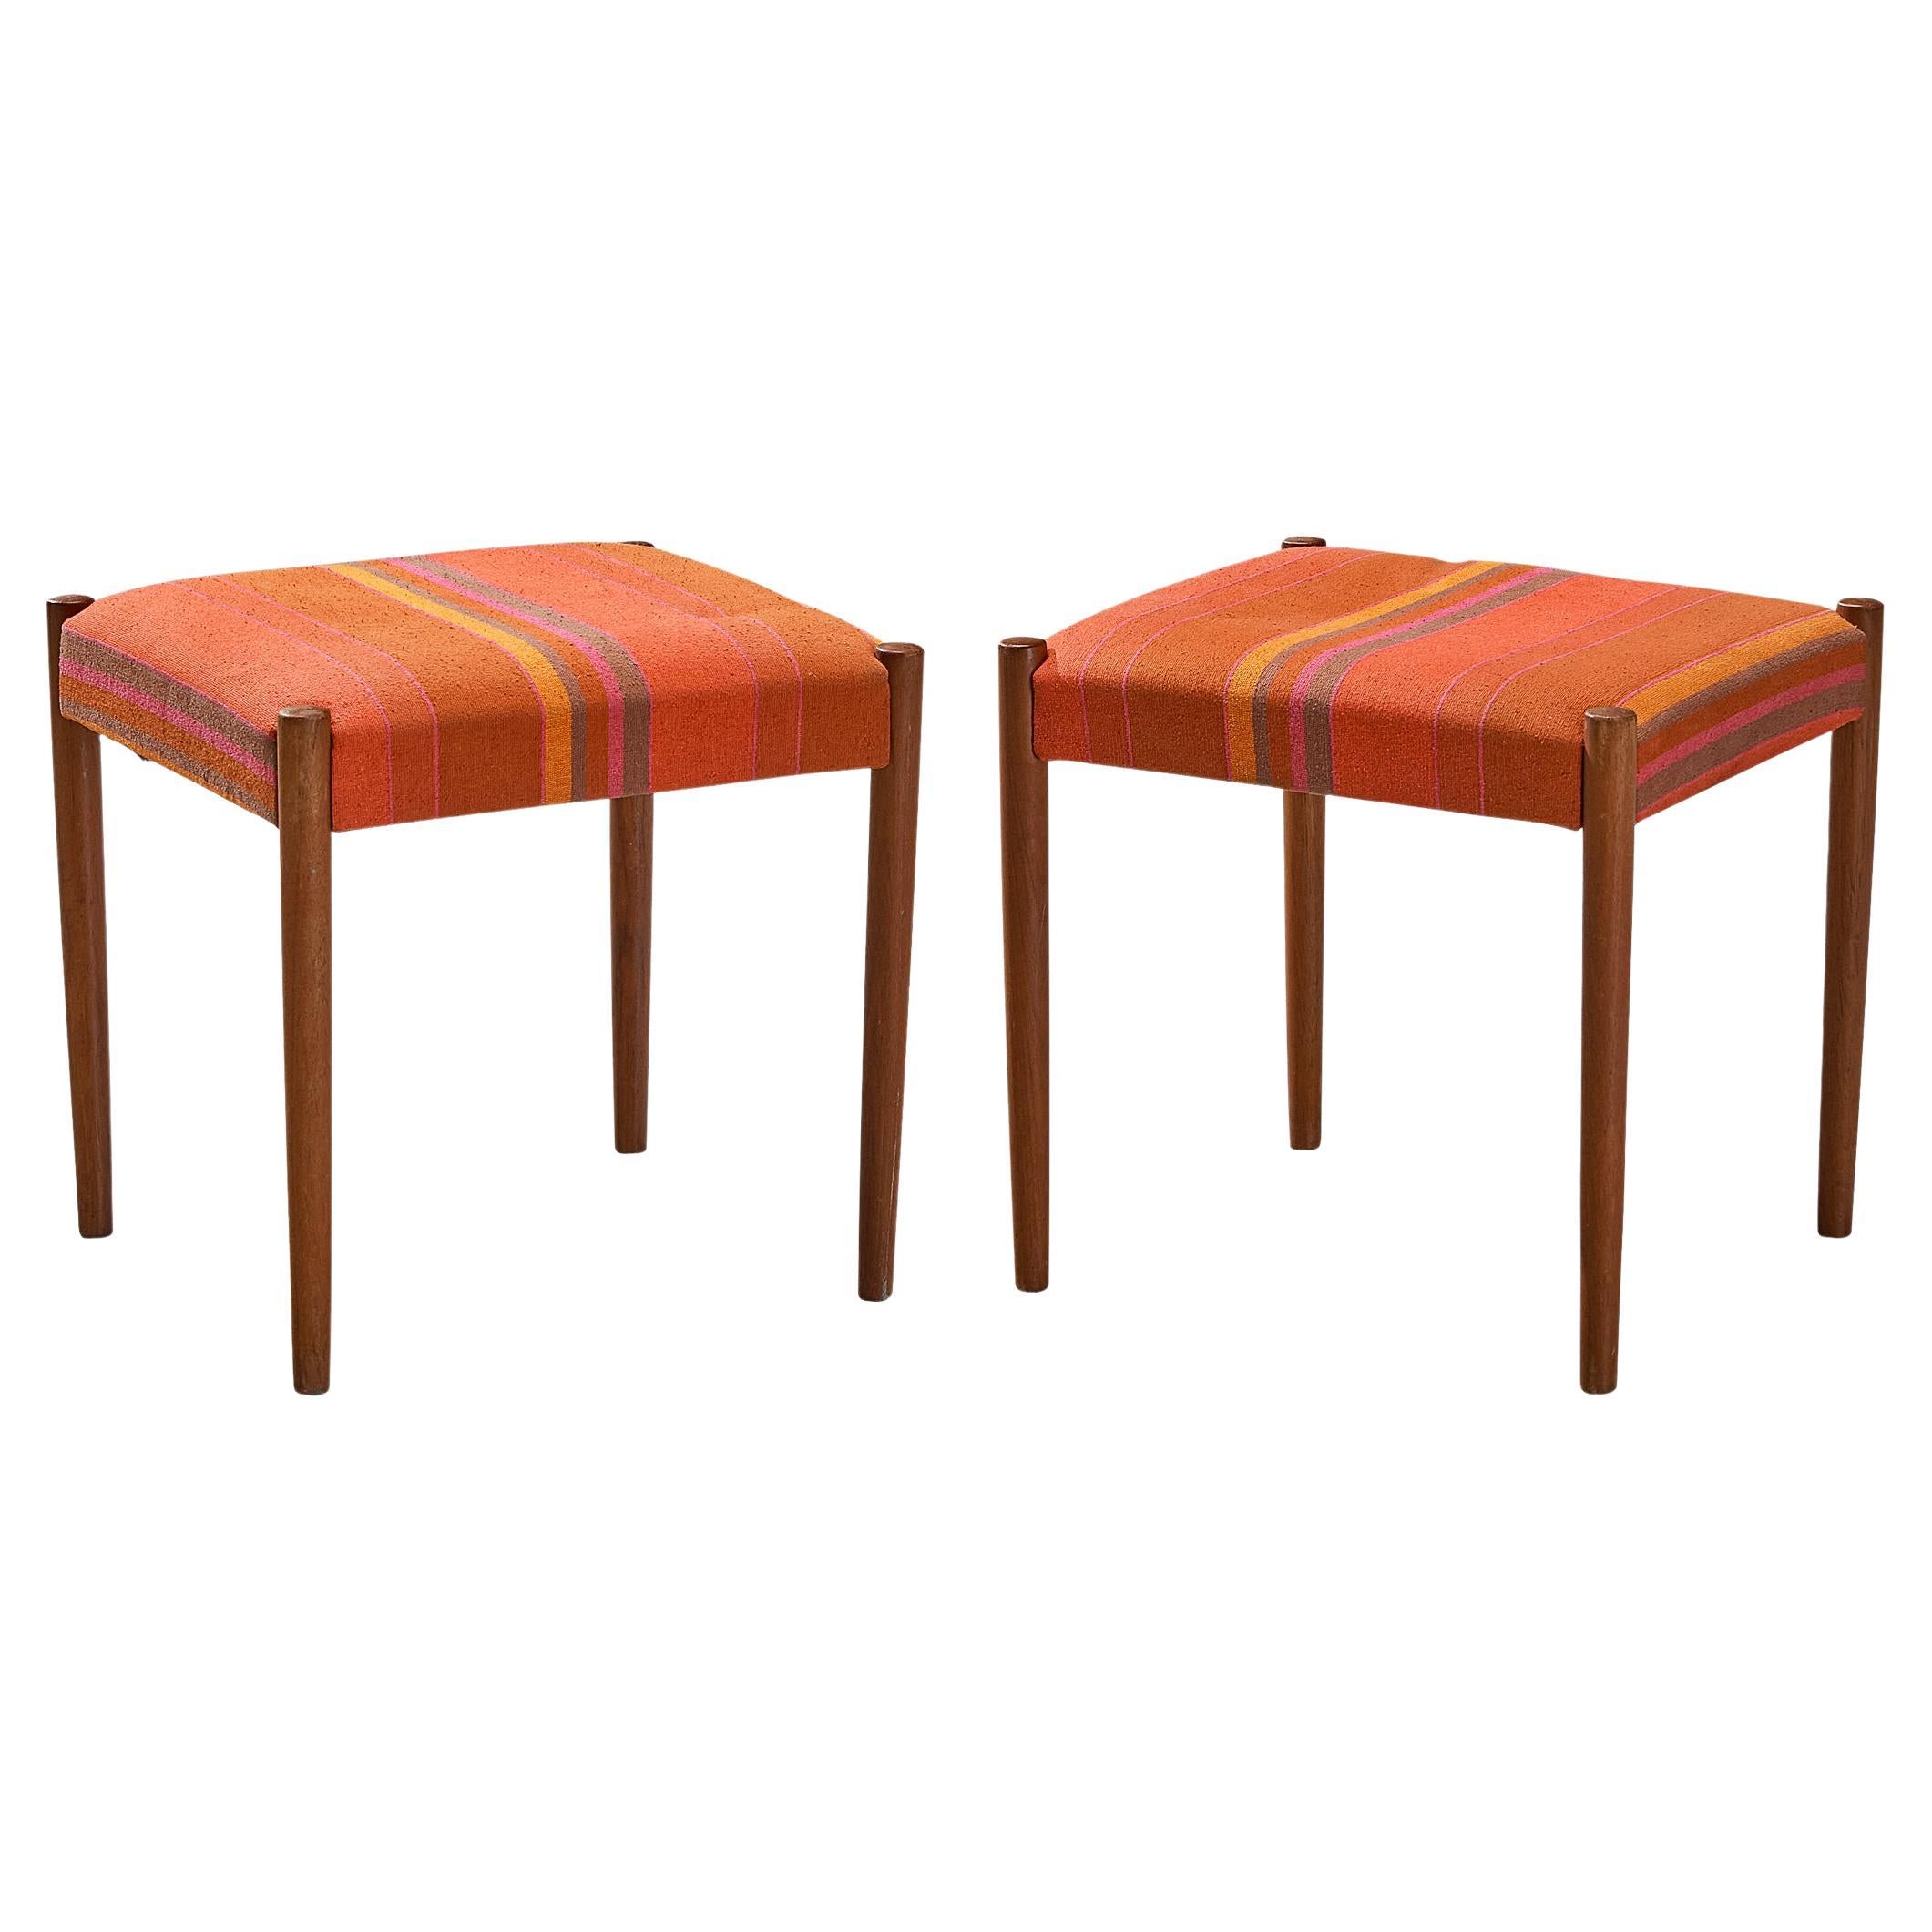 Danish Pair of Stools in Teak and Orange Upholstery  For Sale